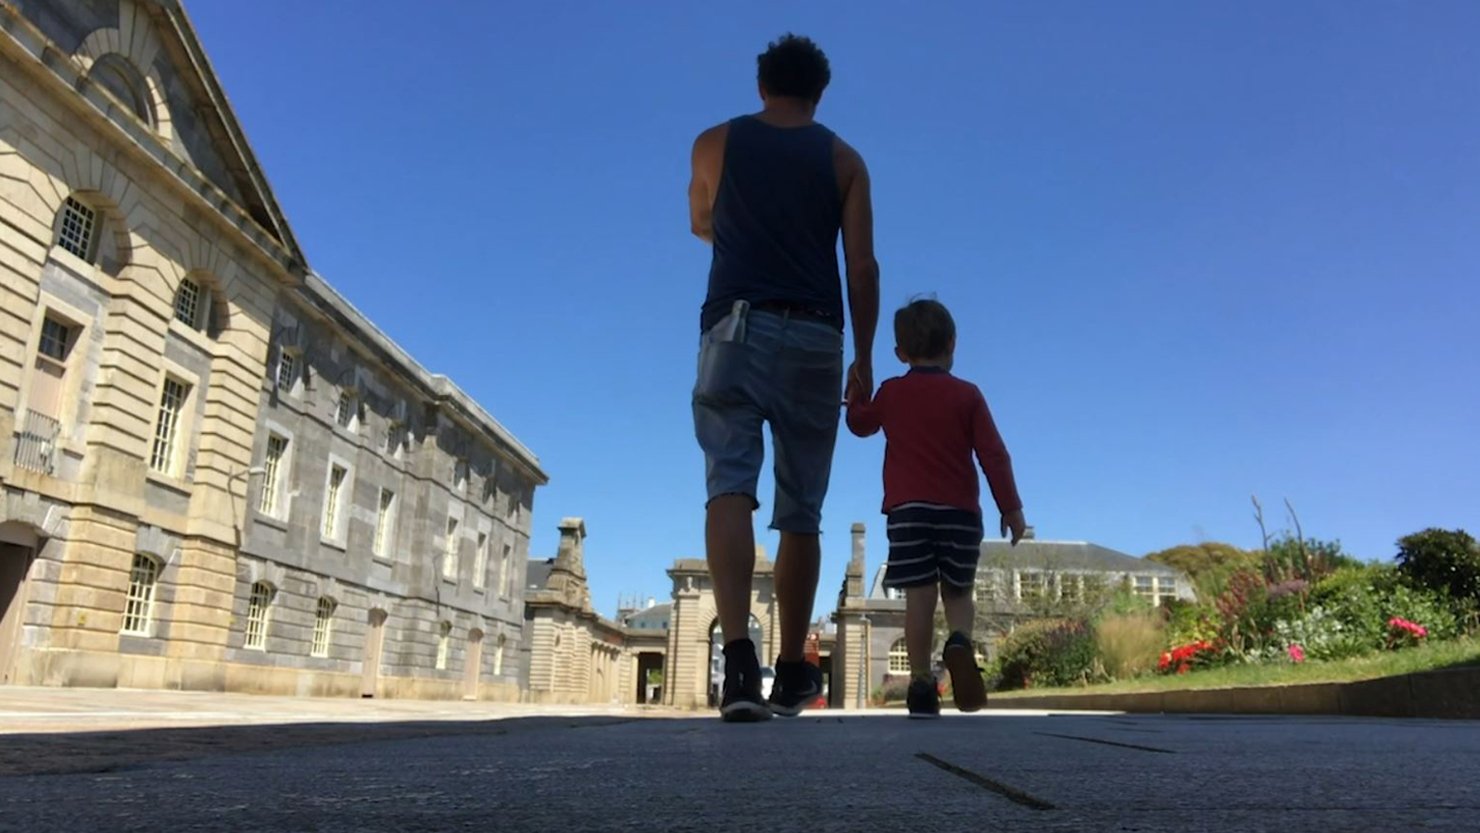 Andy Quick and his son walking through the Royal William Yard in Plymouth - June 2020